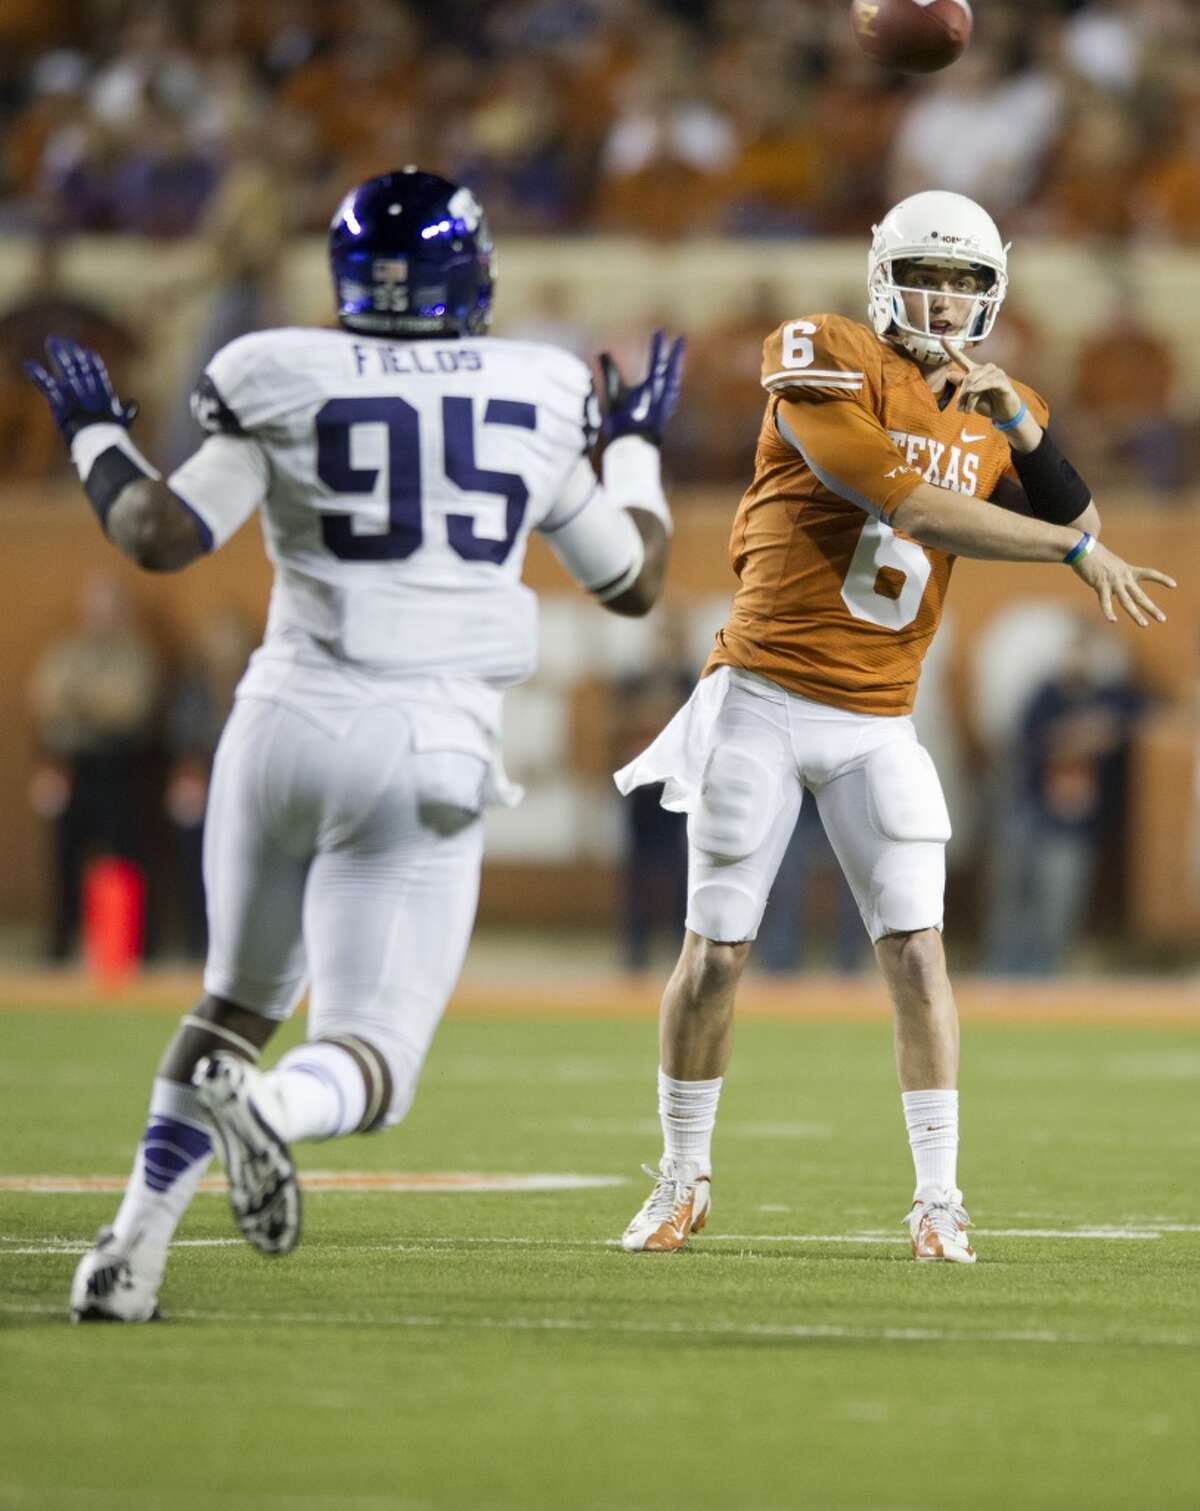 Case McCoy is in line to start the Longhorns' next game.